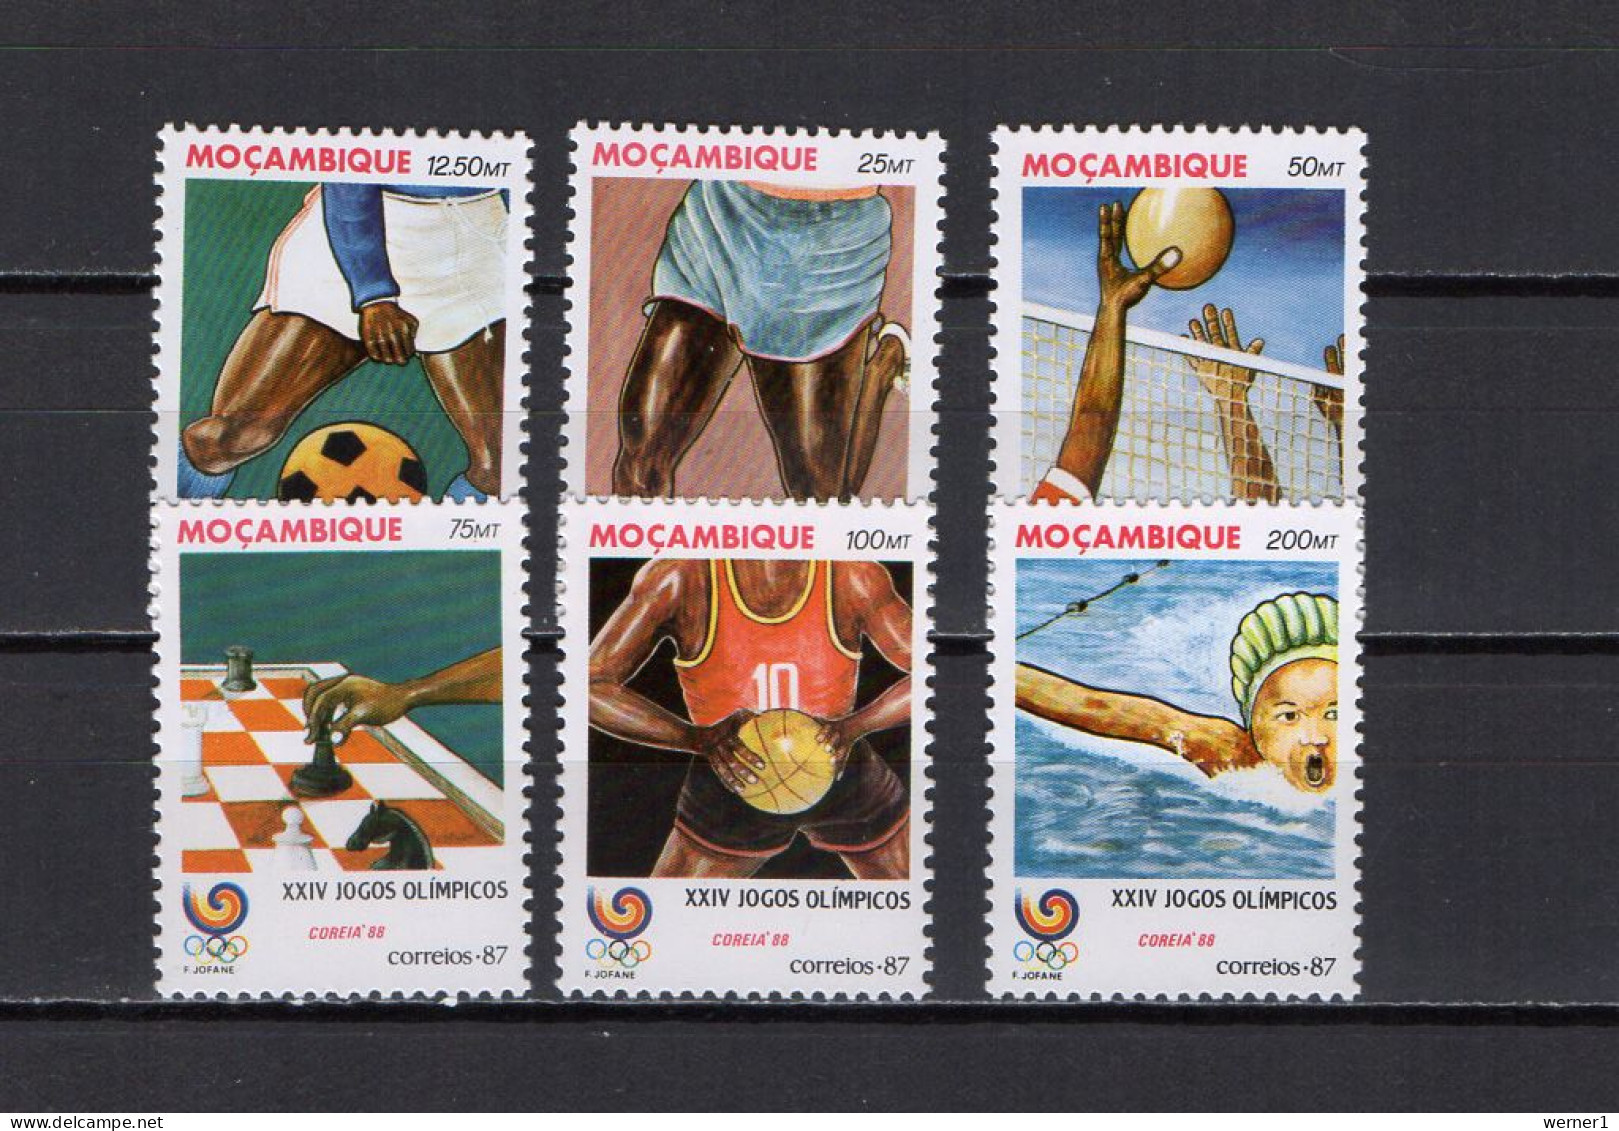 Mocambique 1987 Olympic Games Seoul, Football Soccer, Volleyball, Chess, Basketball, Swimming Set Of 6 MNH - Verano 1988: Seúl